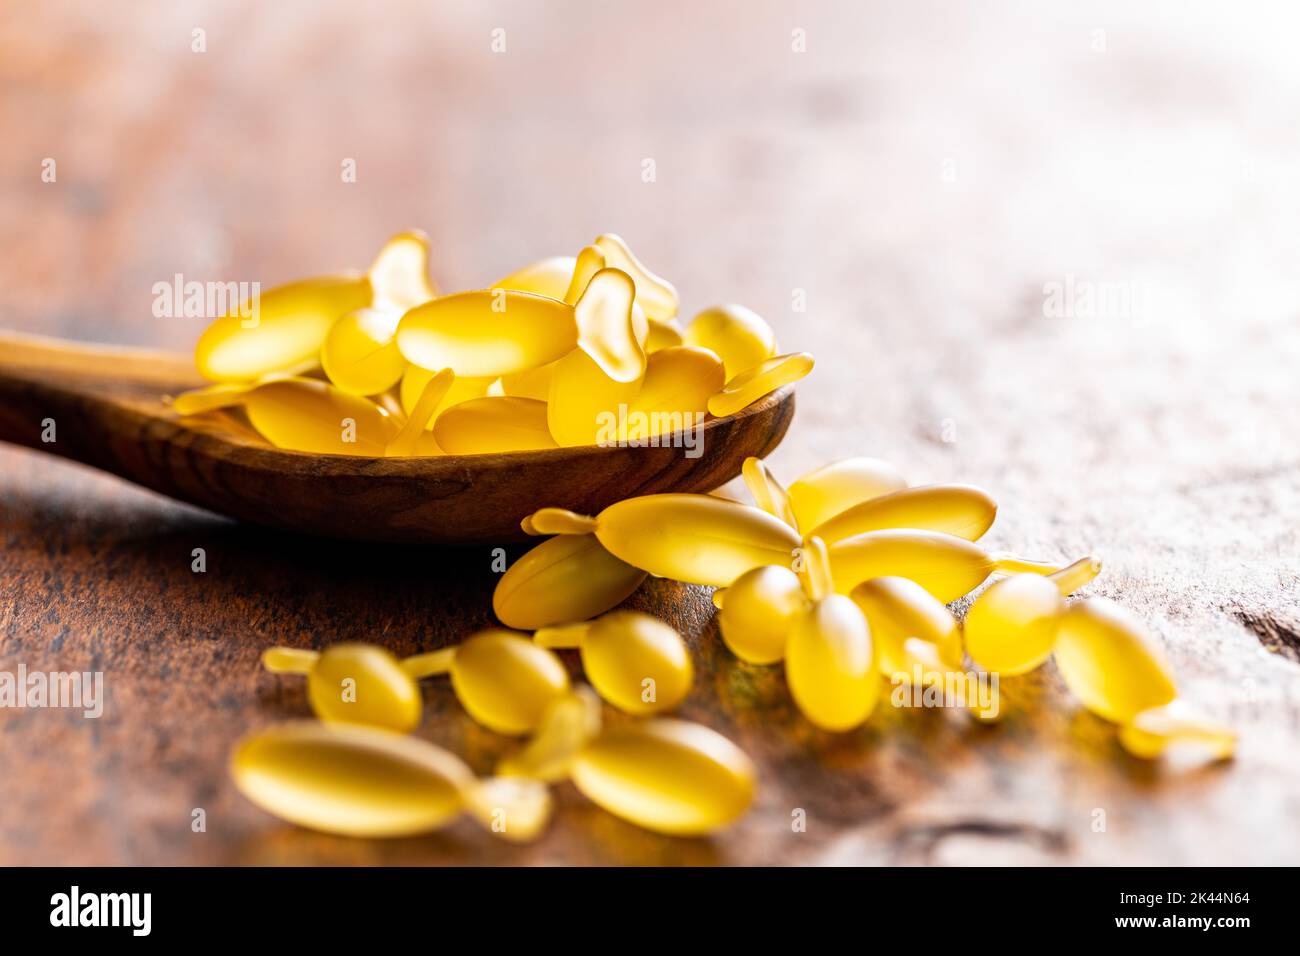 Fish oil capsules in spoon. Yellow omega 3 pills on the wooden table. Stock Photo